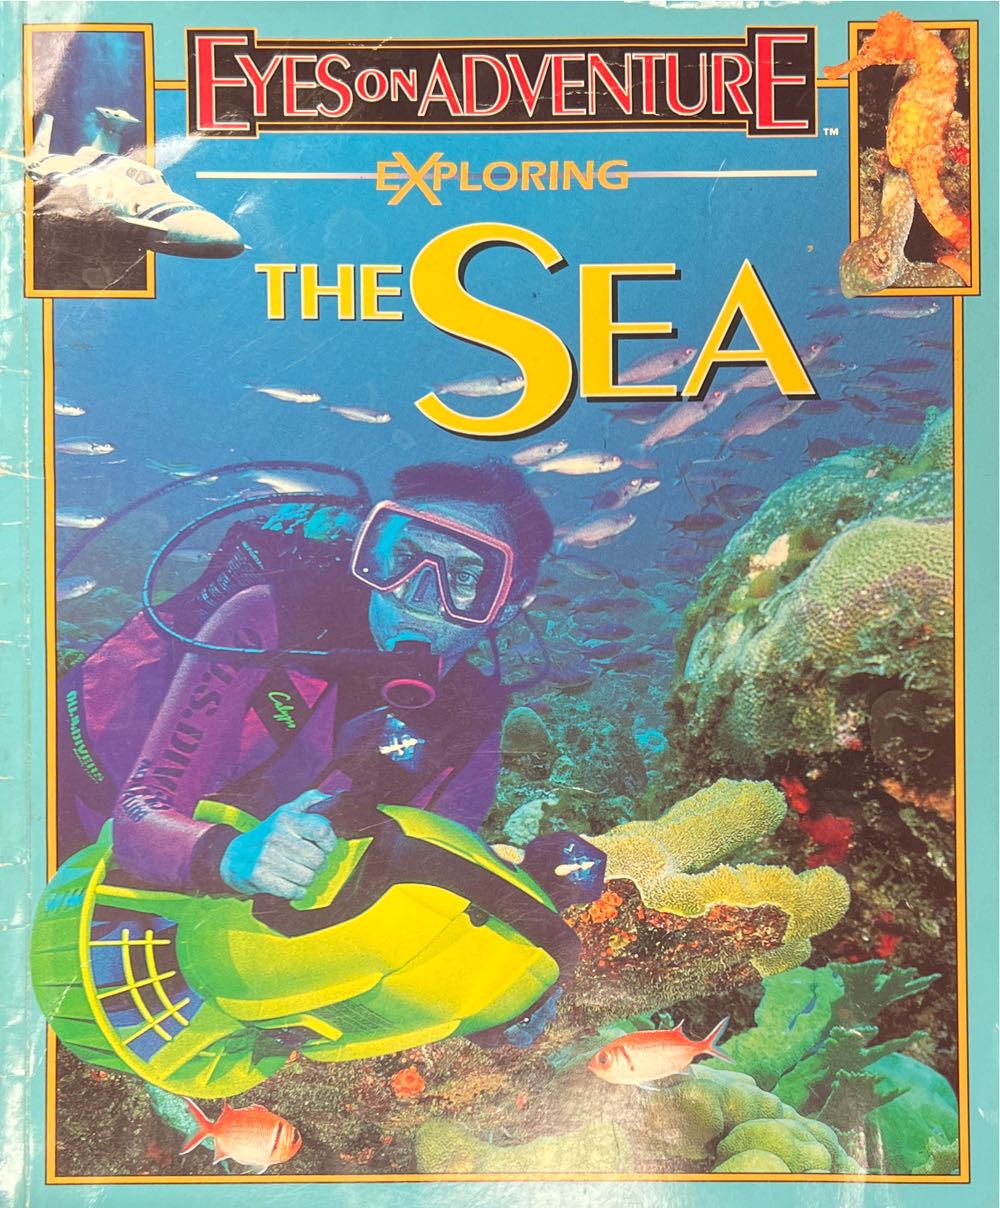 Eyes On Adventure Exploring The Sea - Celia Bland (Kids Books - Paperback) book collectible [Barcode 9781561565375] - Main Image 3